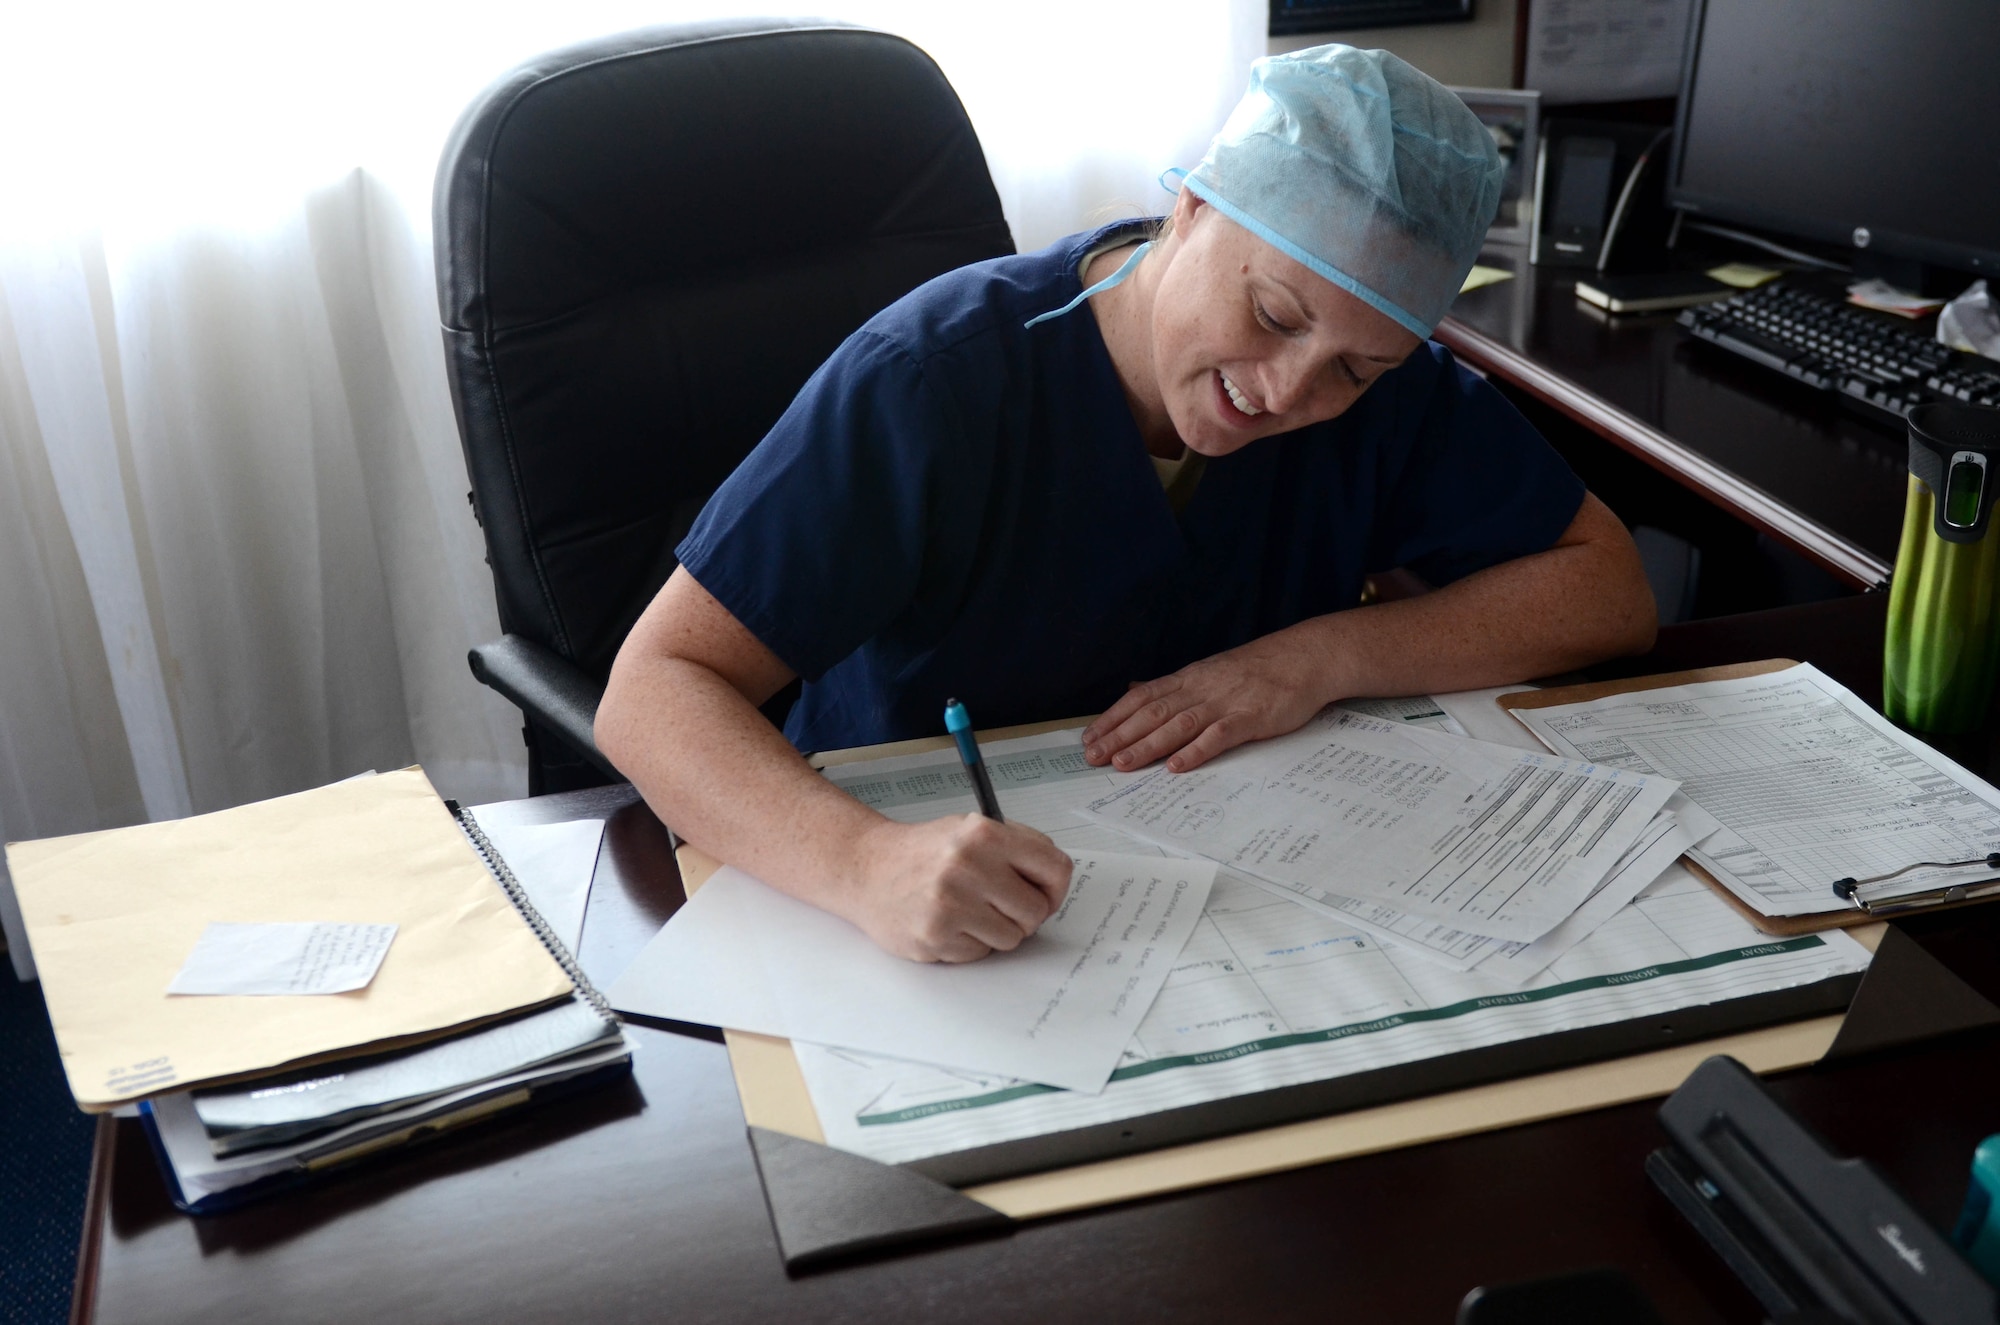 U.S. Army Capt. Dr. Annie Eure, Andersen Air Force Base Veterinary Services Branch chief, completes paperwork after a long day of work July 9, 2015 at Andersen AFB, Guam. The Andersen AFB Veterinary Treatment Facility provides care for more than 2,000 active animal patients. (U.S. Air Force photo by Airman 1st Class Alexa Ann Henderson/Released)